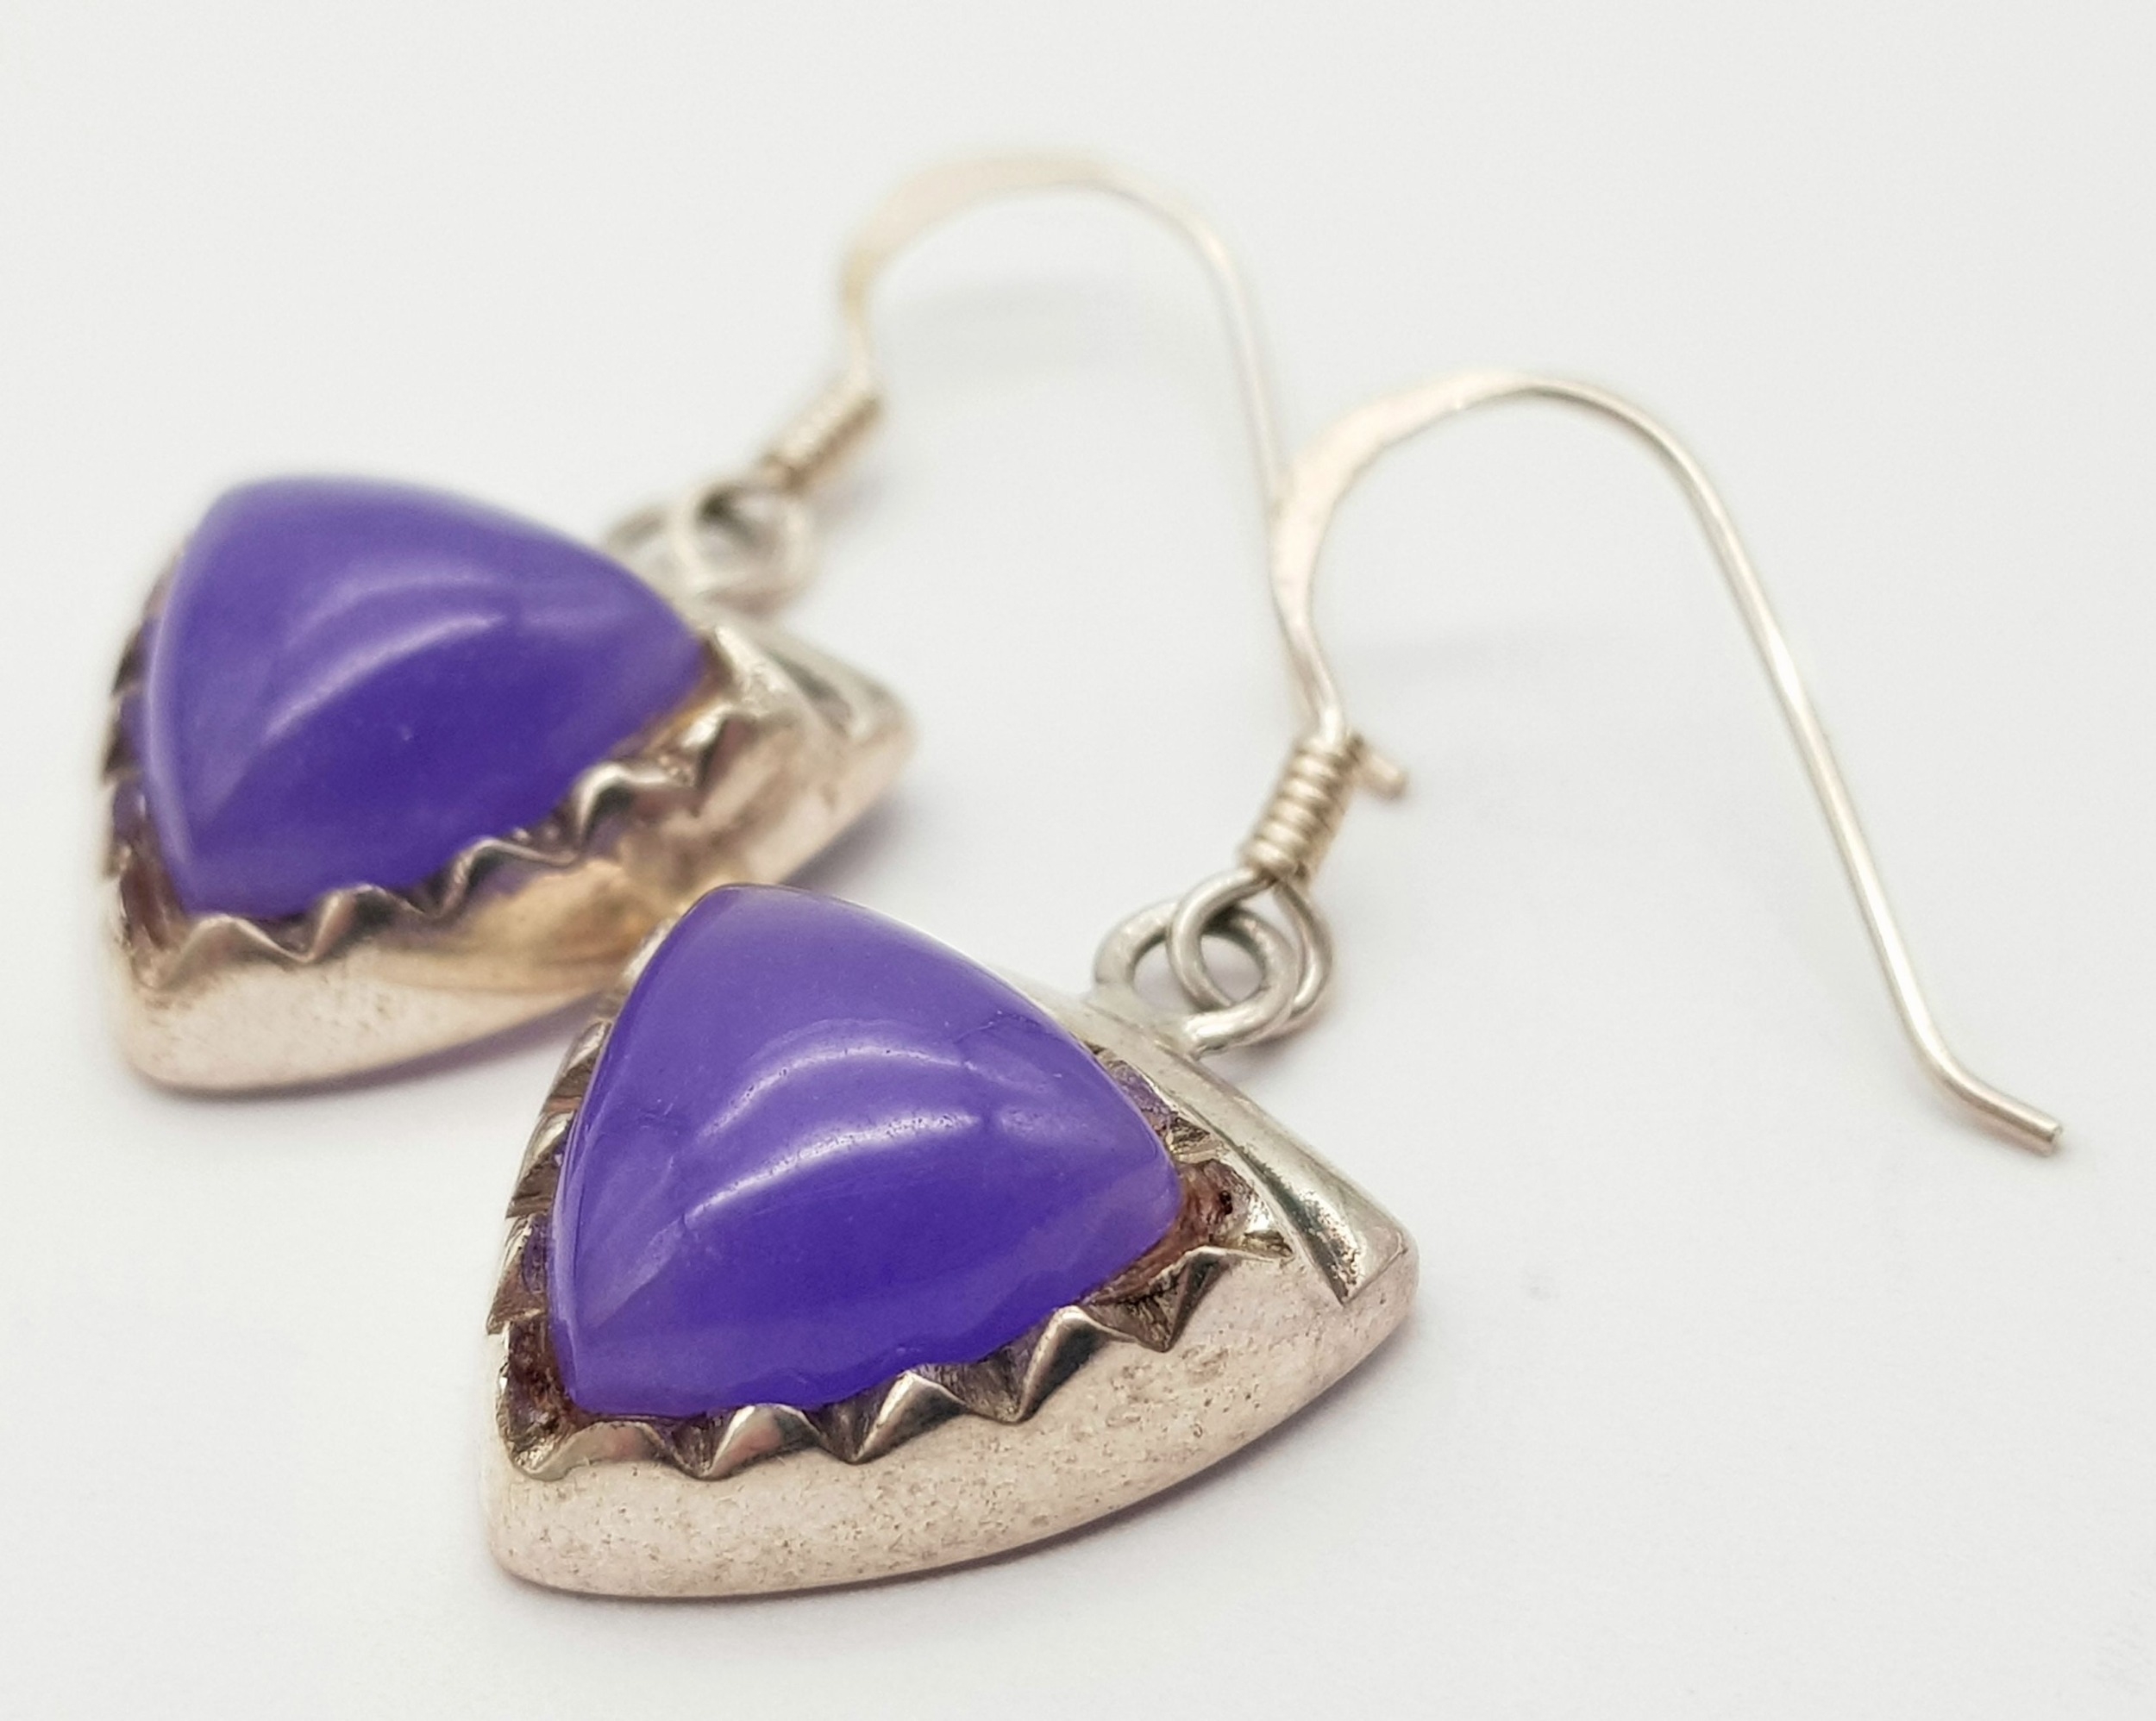 A Pair of Sterling Silver Trillion Cut Lavender Jade Earrings. 3cm Drop. Set with 1cm Wide - Image 4 of 5